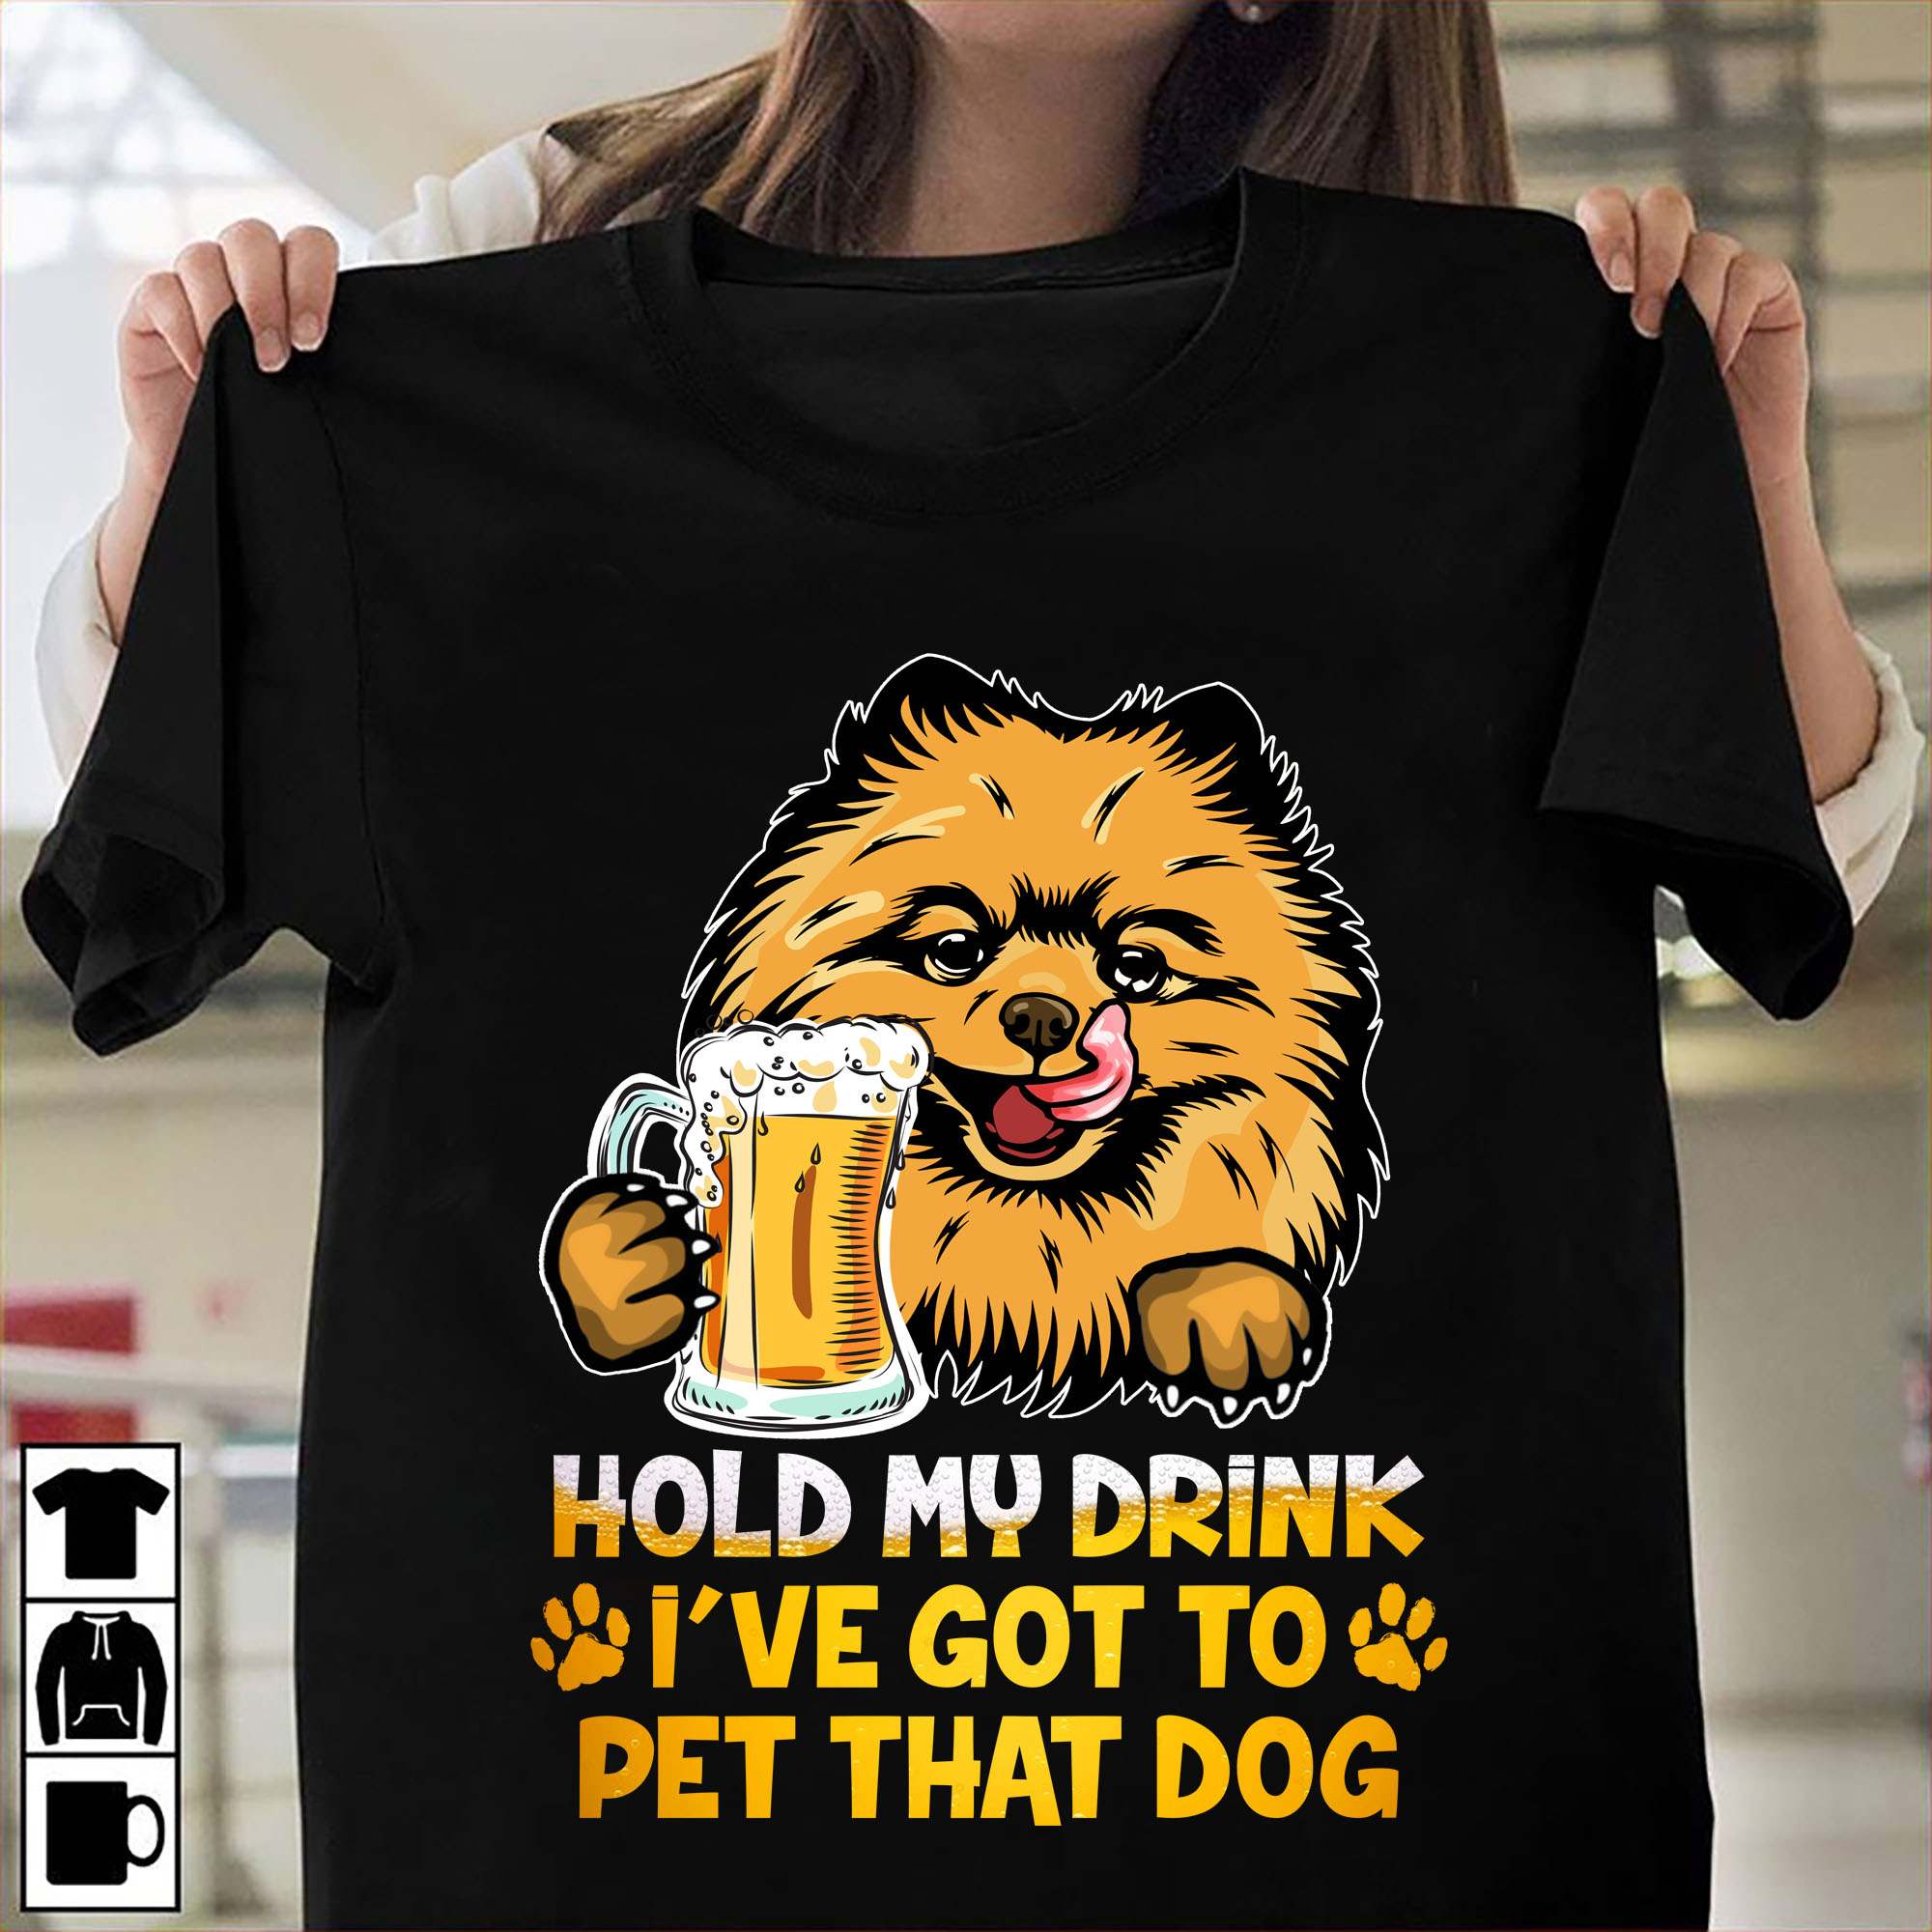 Hold my drink I've got to pet that dog - Pomeranian dog and beer